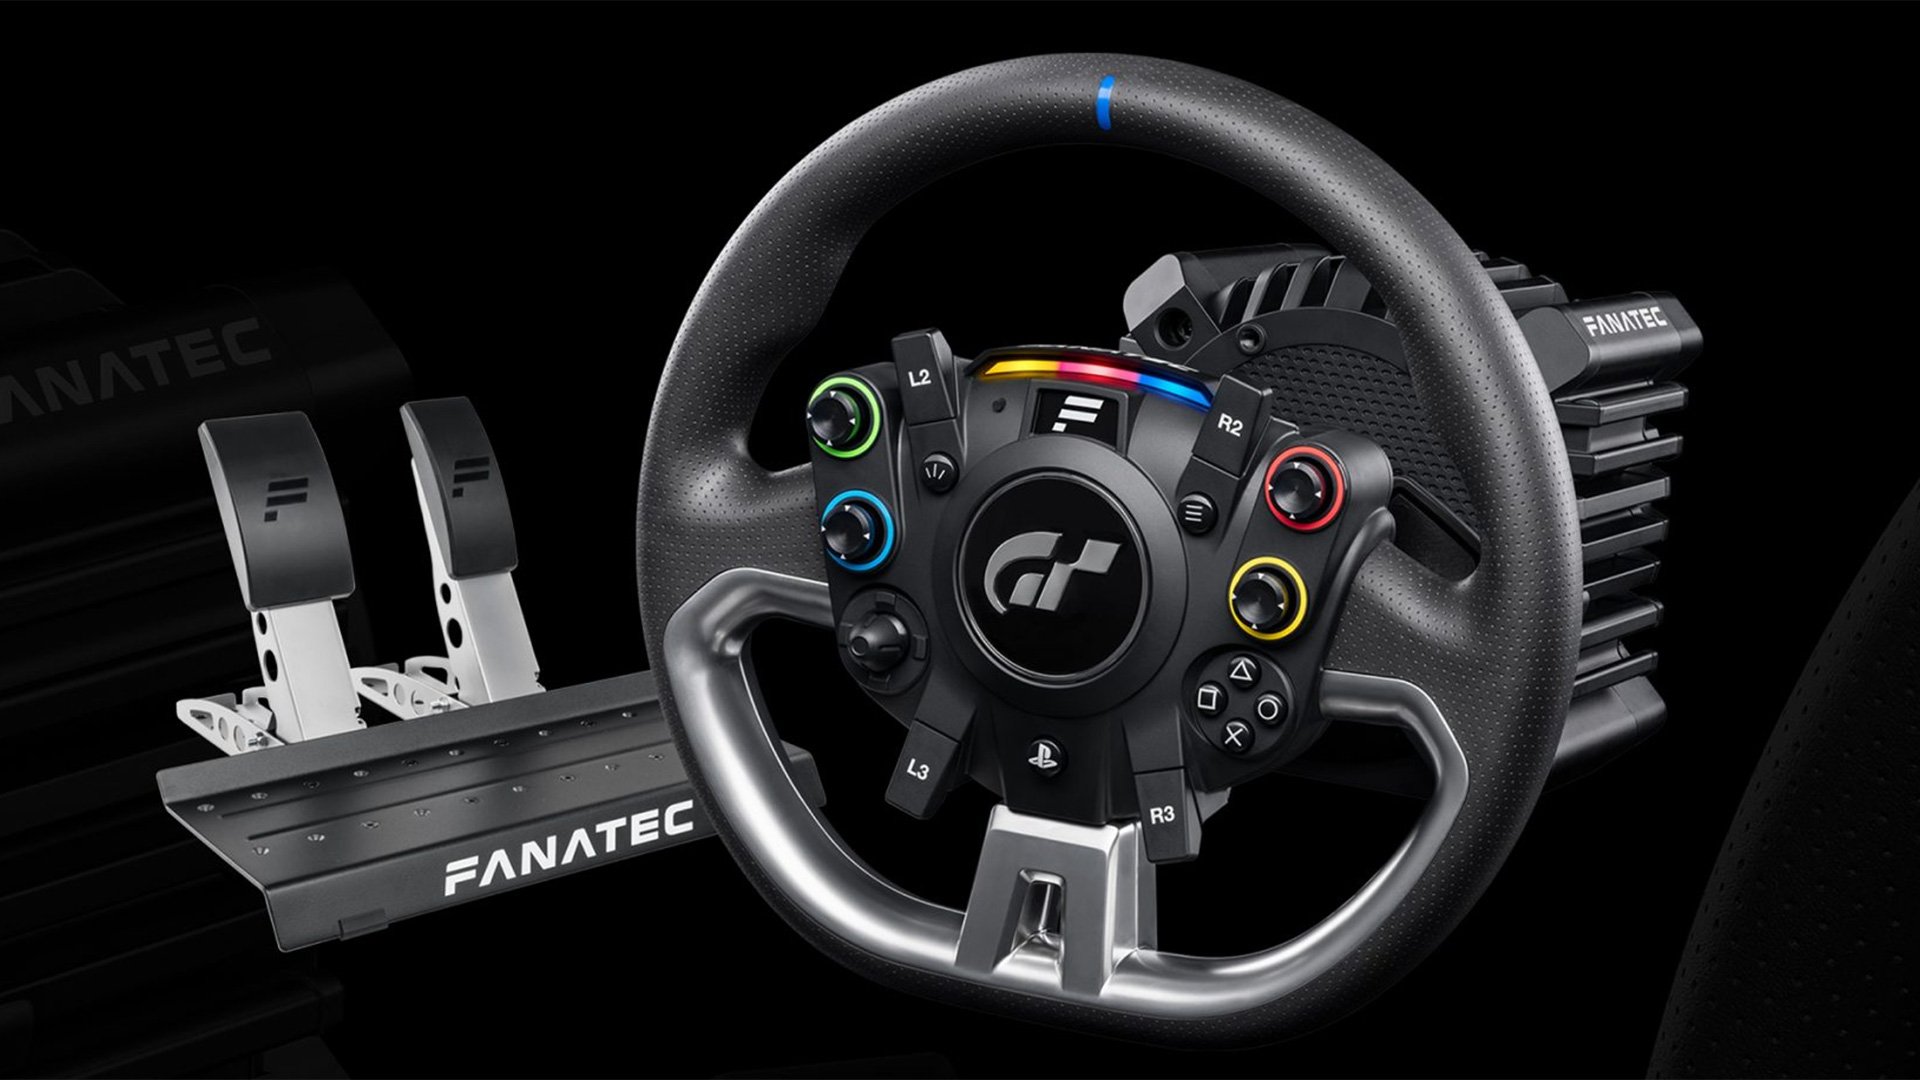 Fanatec Gran Turismo DD Pro Officially Revealed for GT Sport and